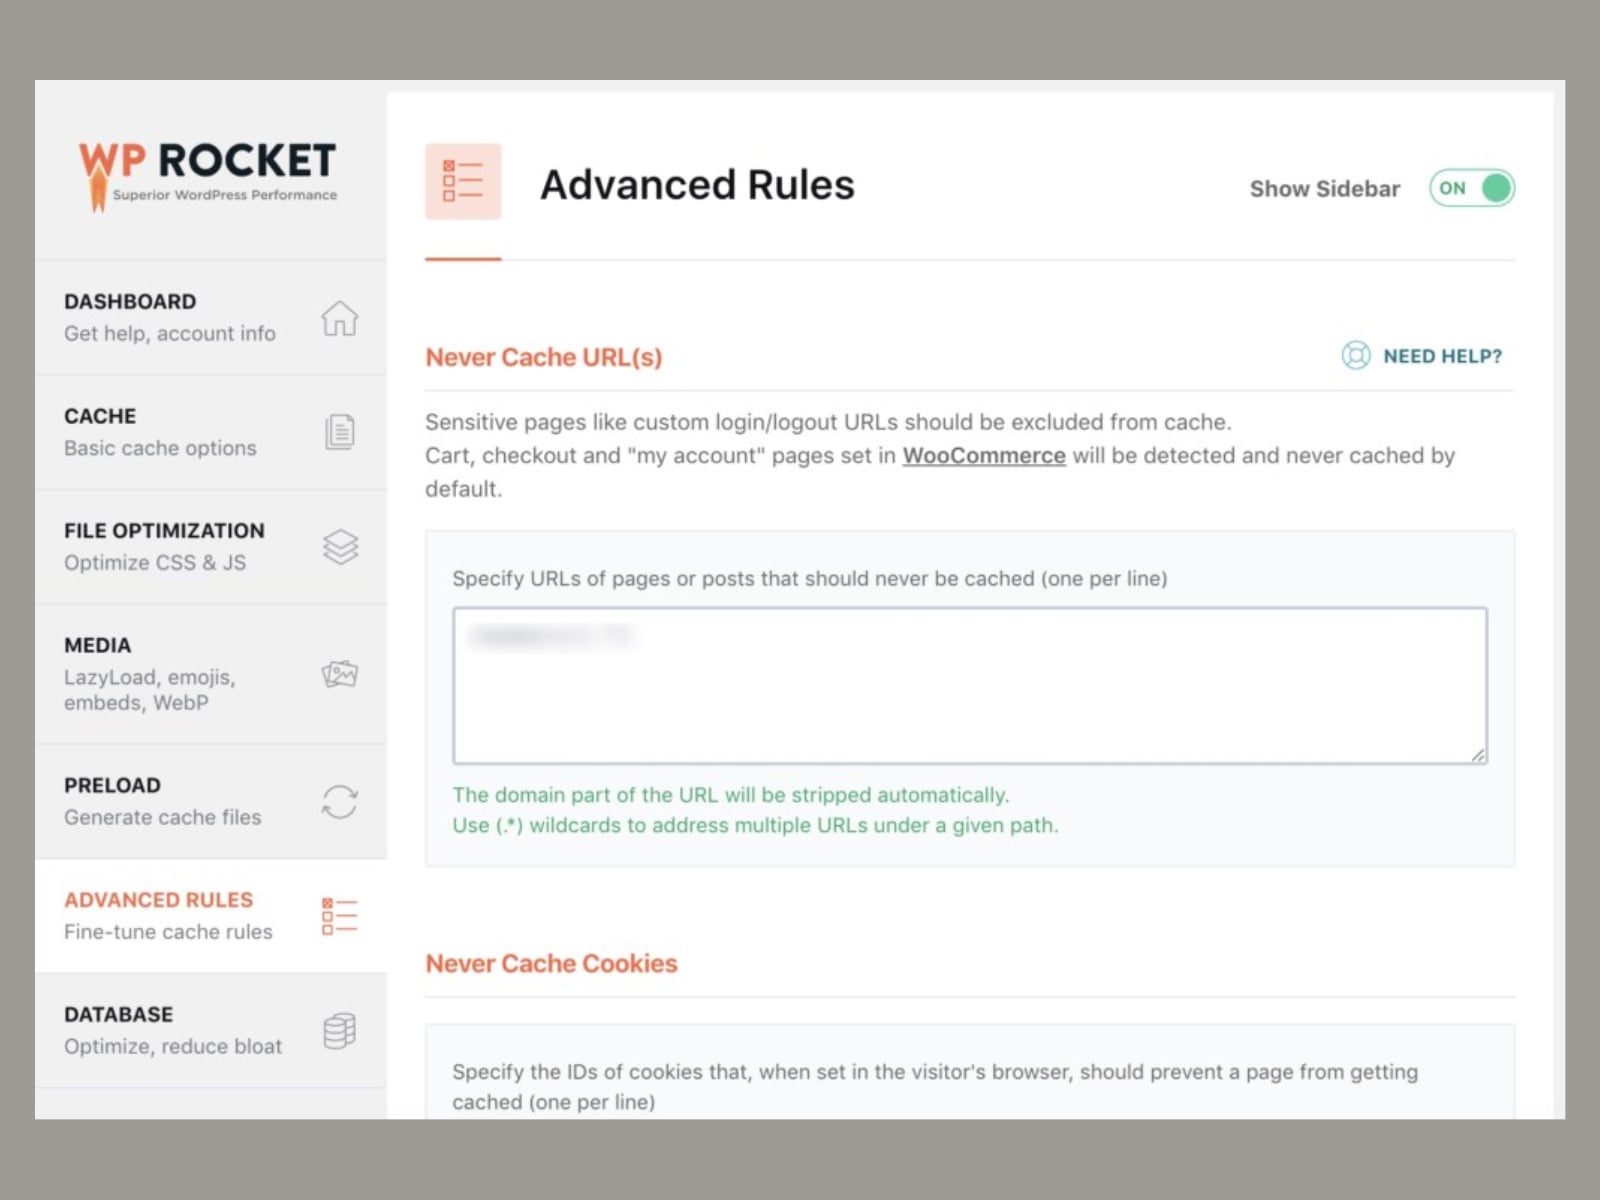 WP Rocket advanced rules tab to configure never cache settings.